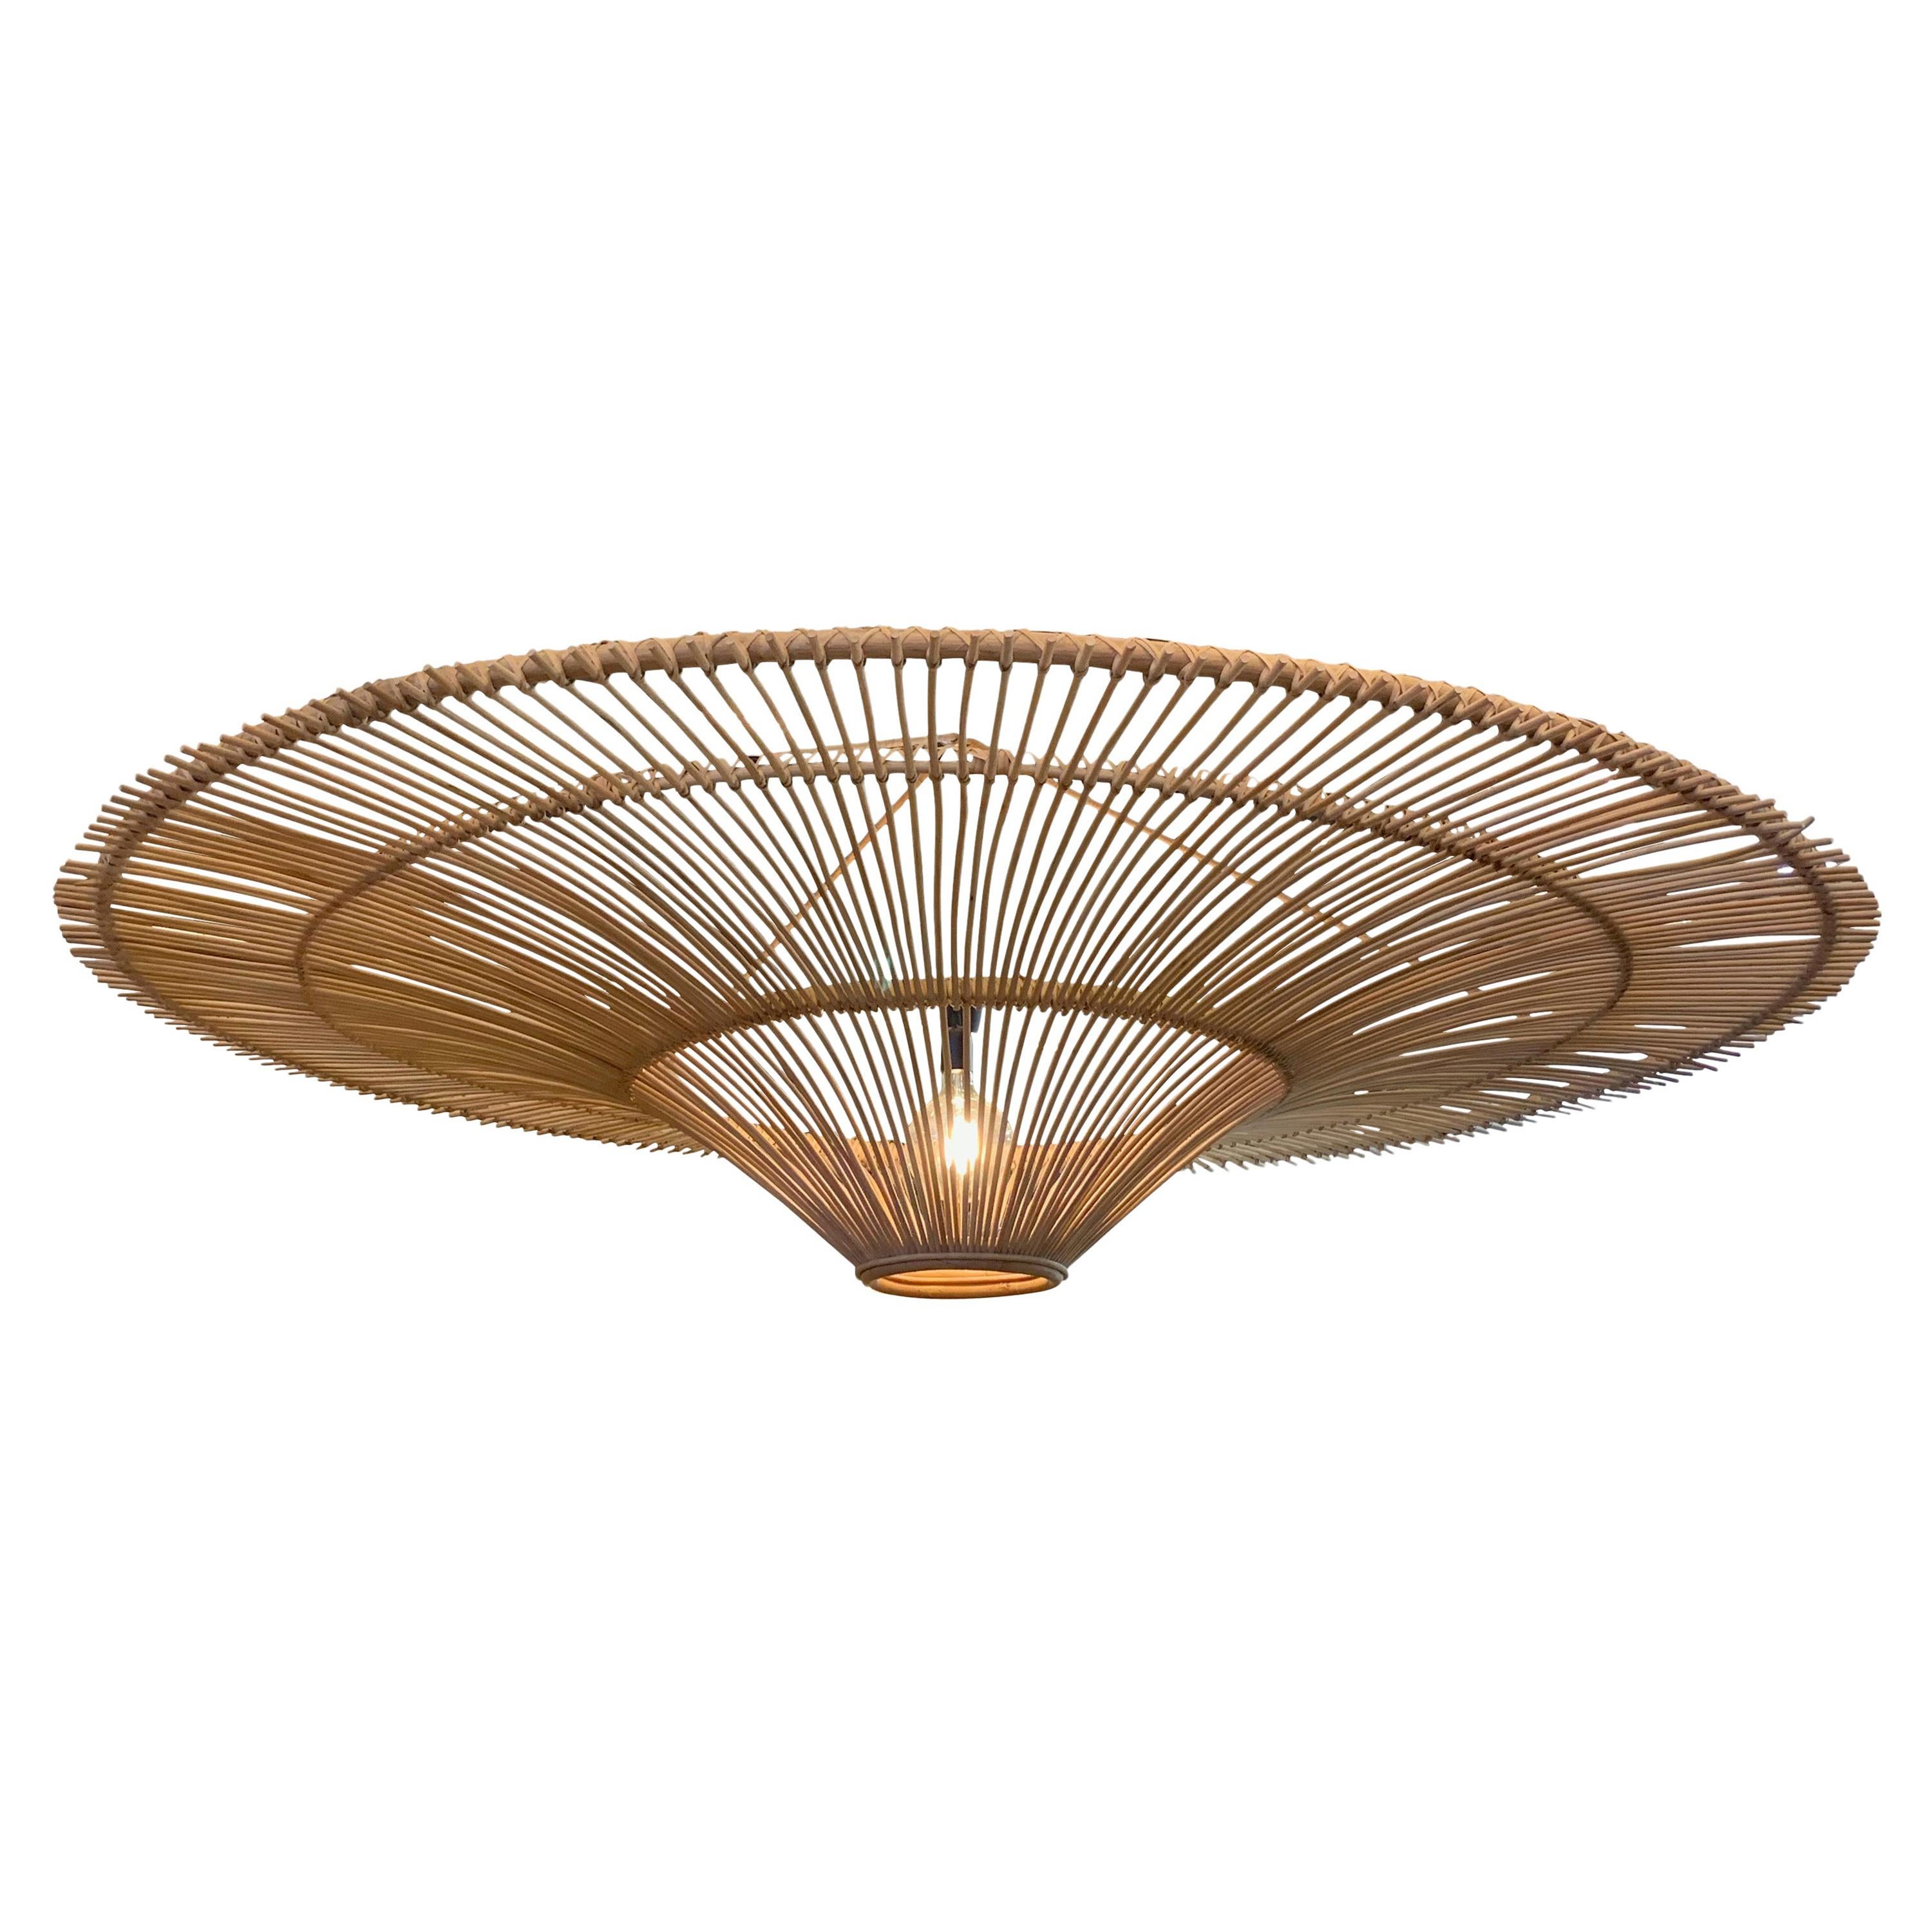 Large Umbrella Shaped Bamboo Chandelier, Indonesia, Contemporary For Sale